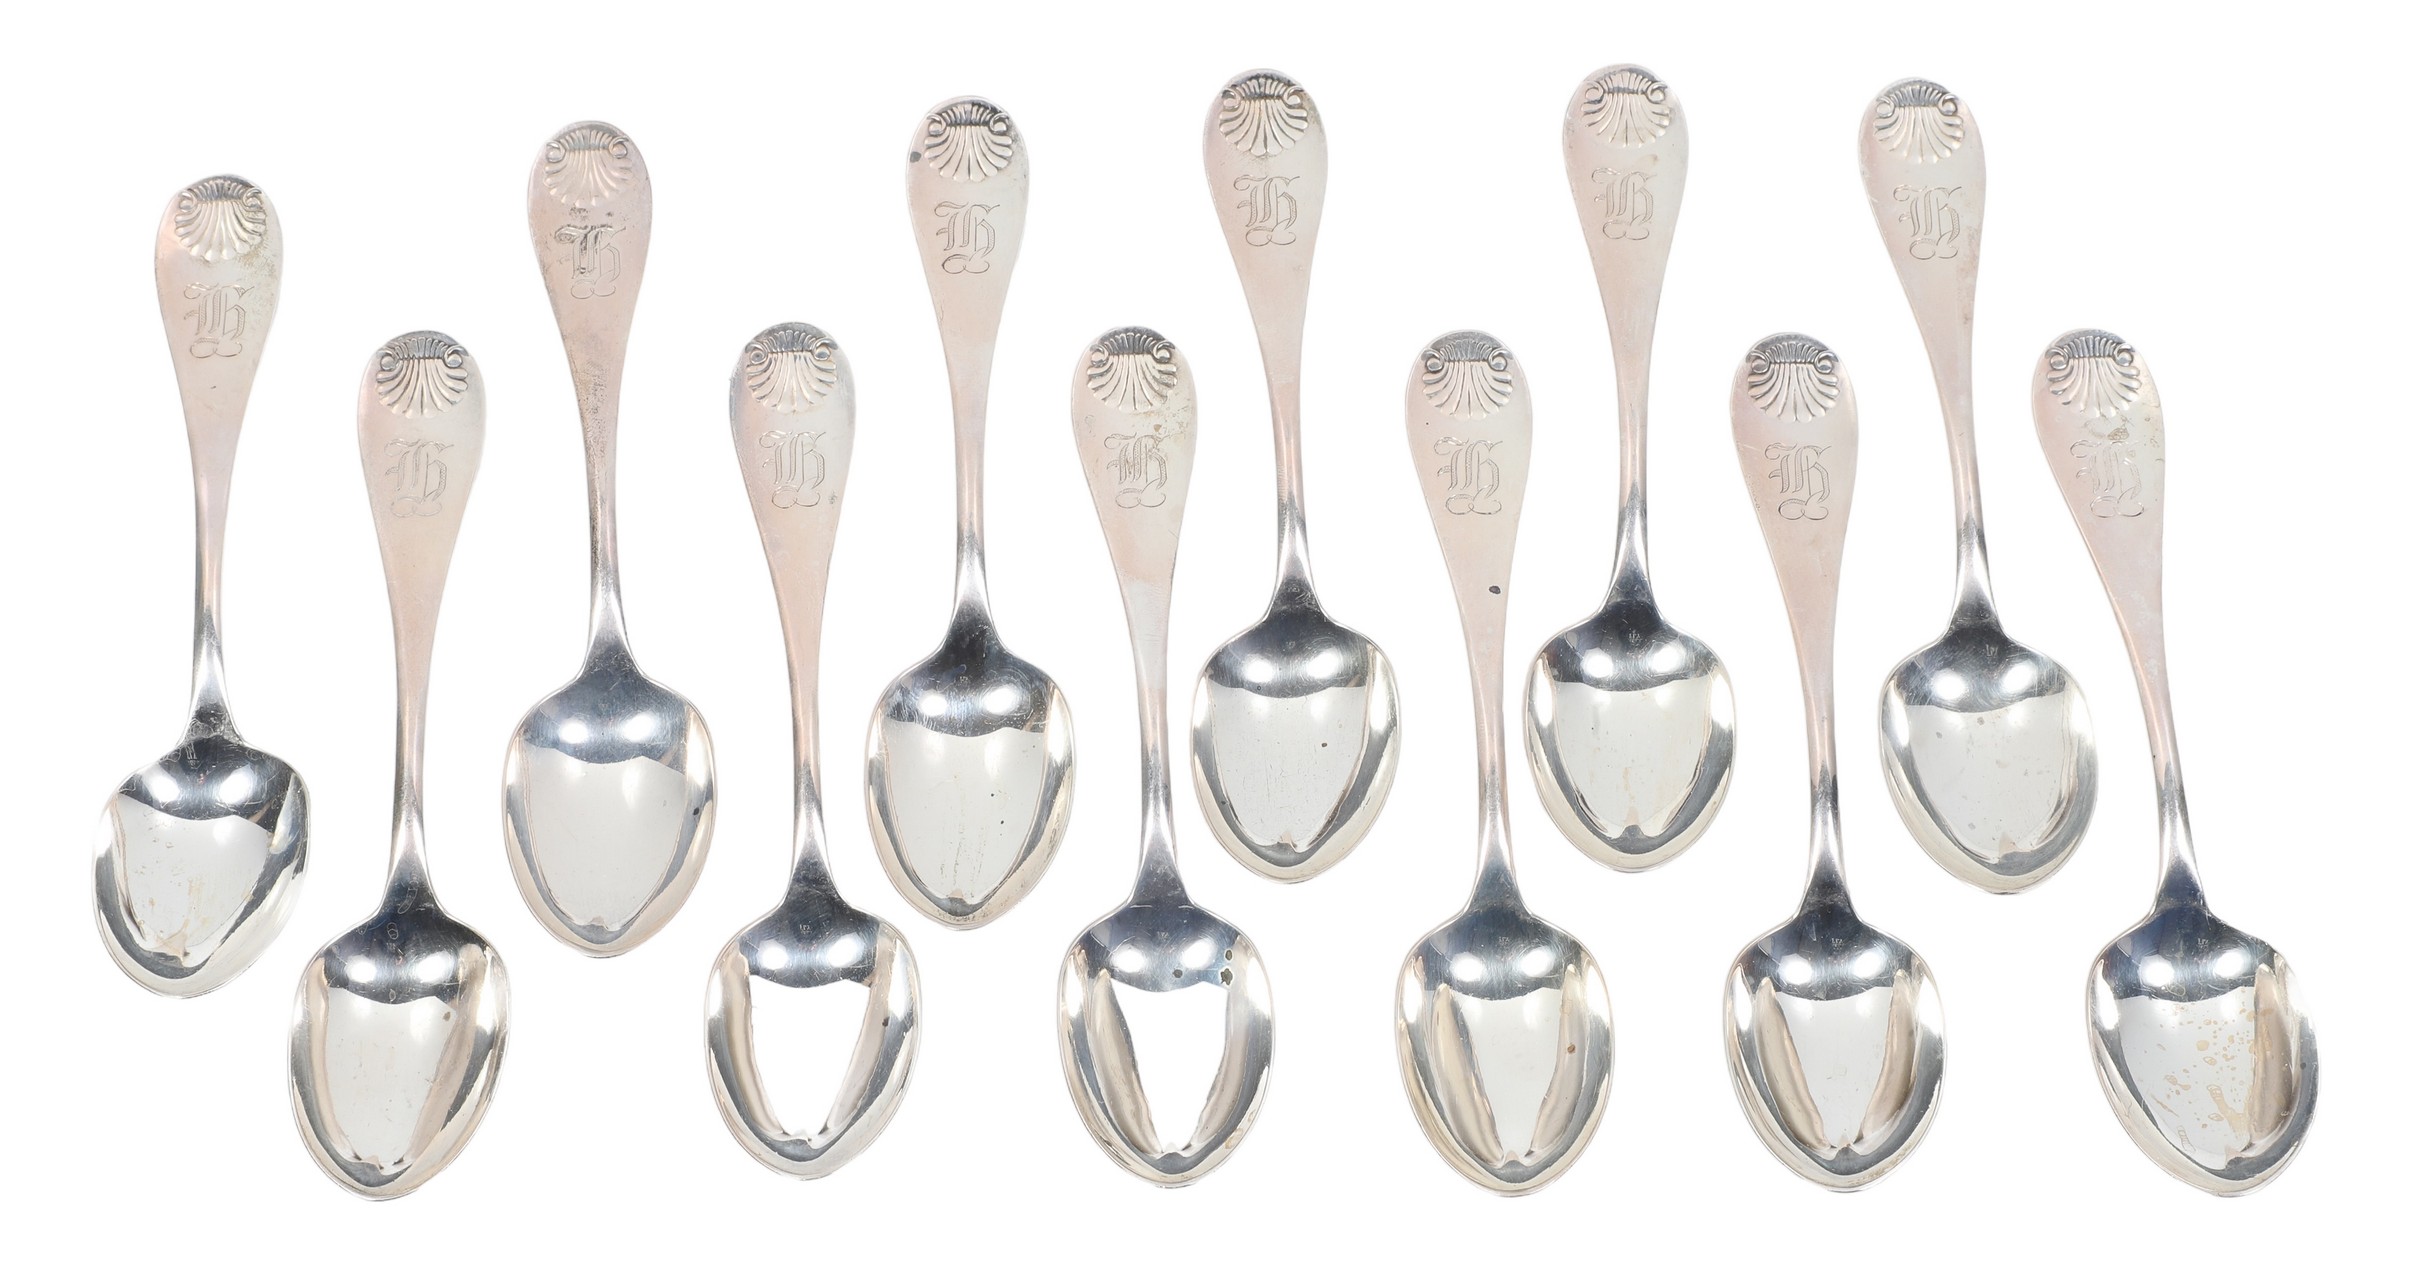  12 Towle sterling teaspoons in 2e0b6f